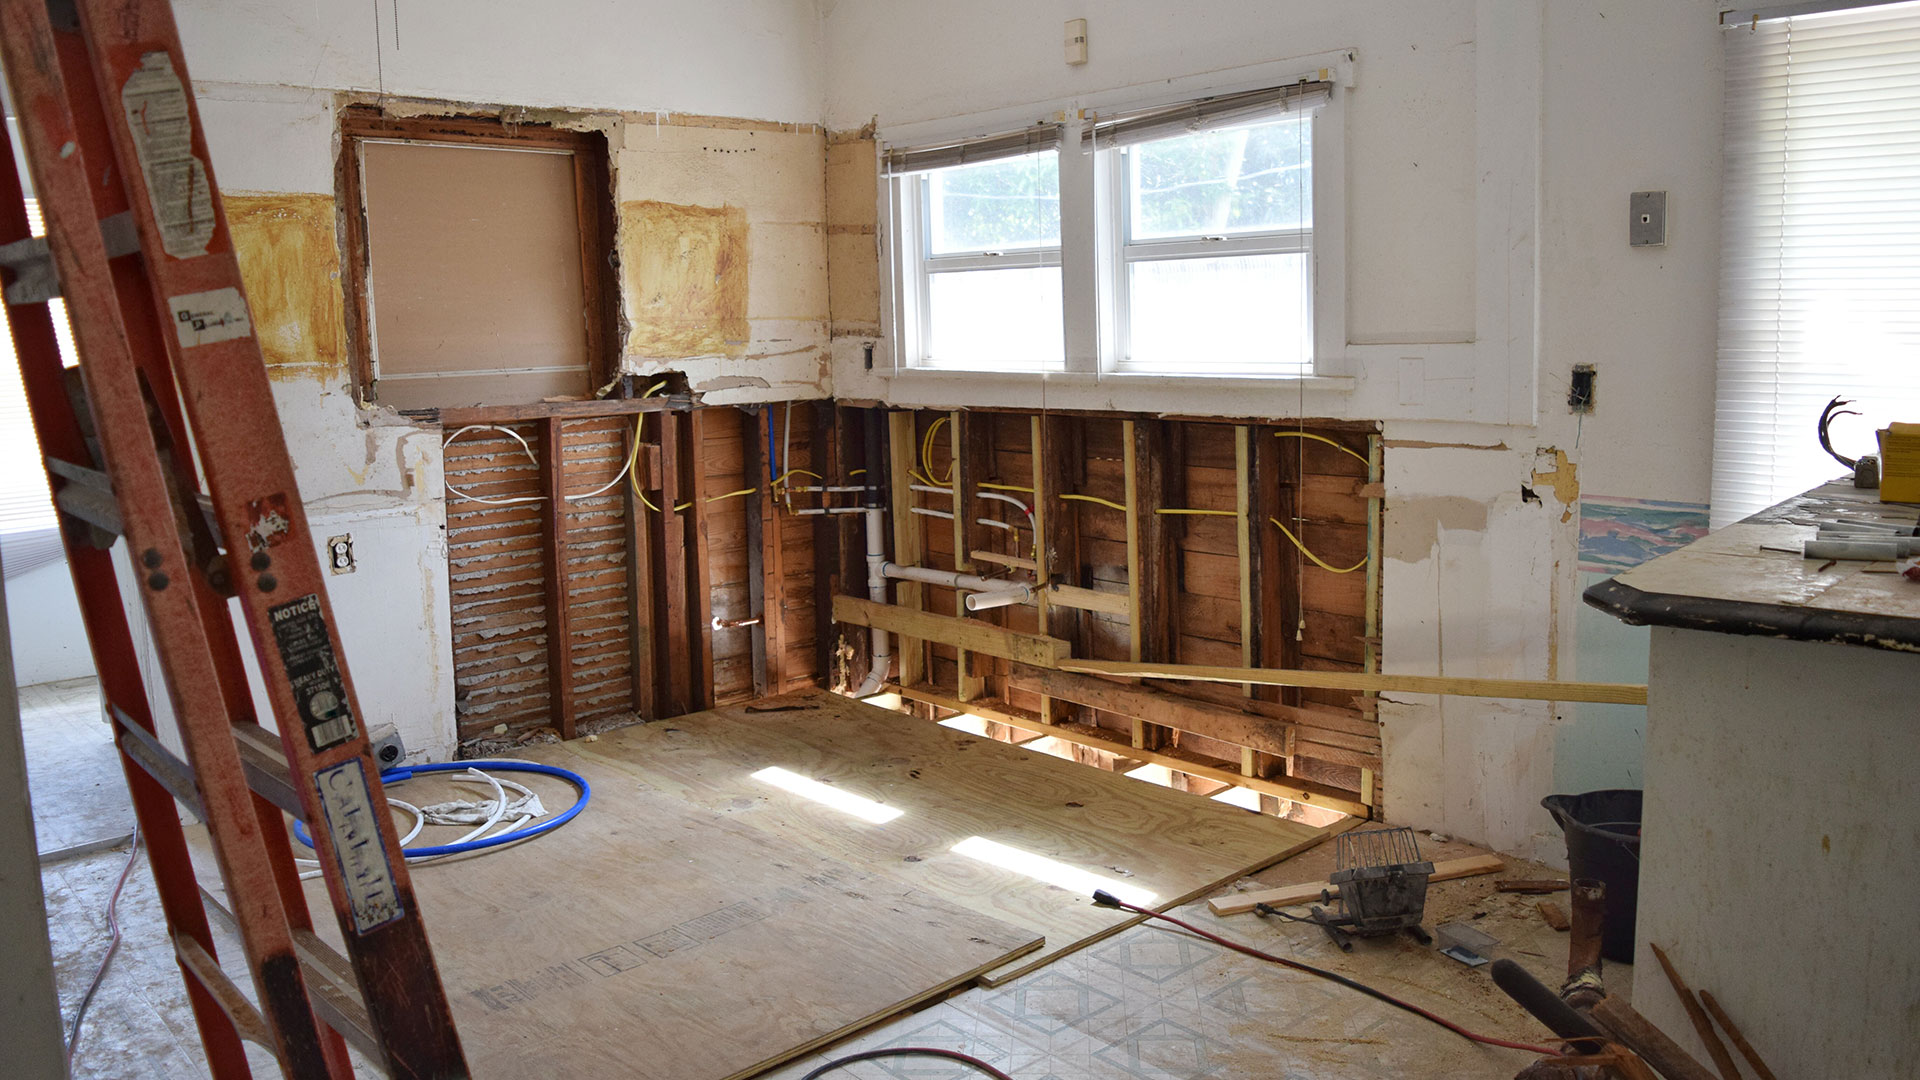 Fixer-Upper Houses: What To Consider